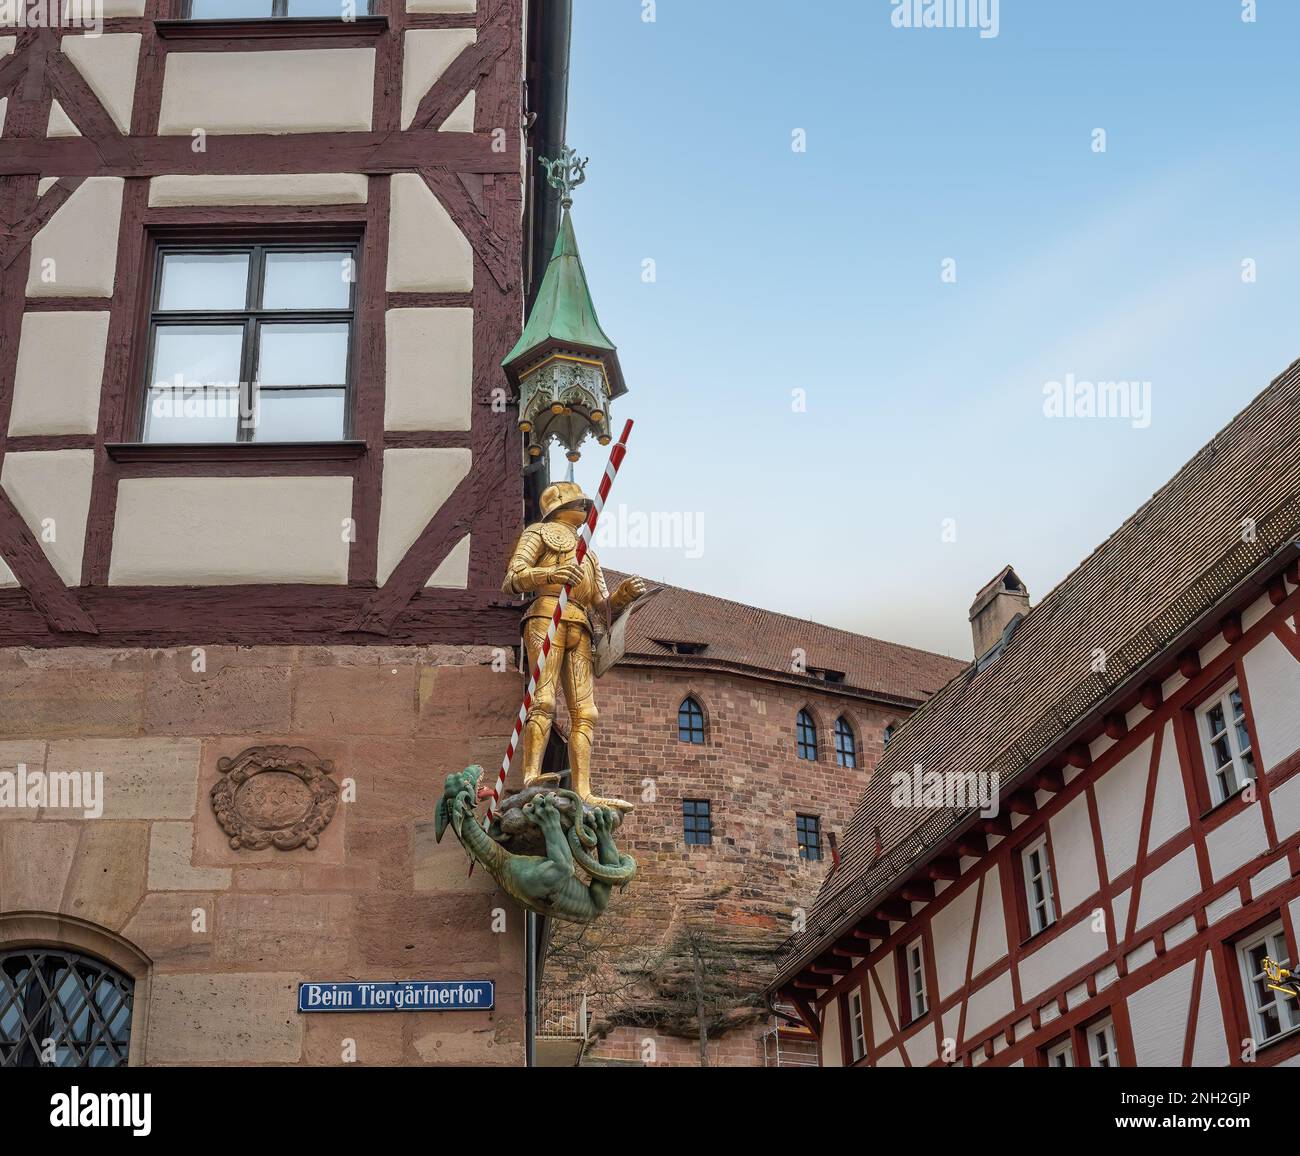 St. George and dragon Statue on a building at Tiergatnertor Square - Nuremberg, Bavaria, Germany Stock Photo